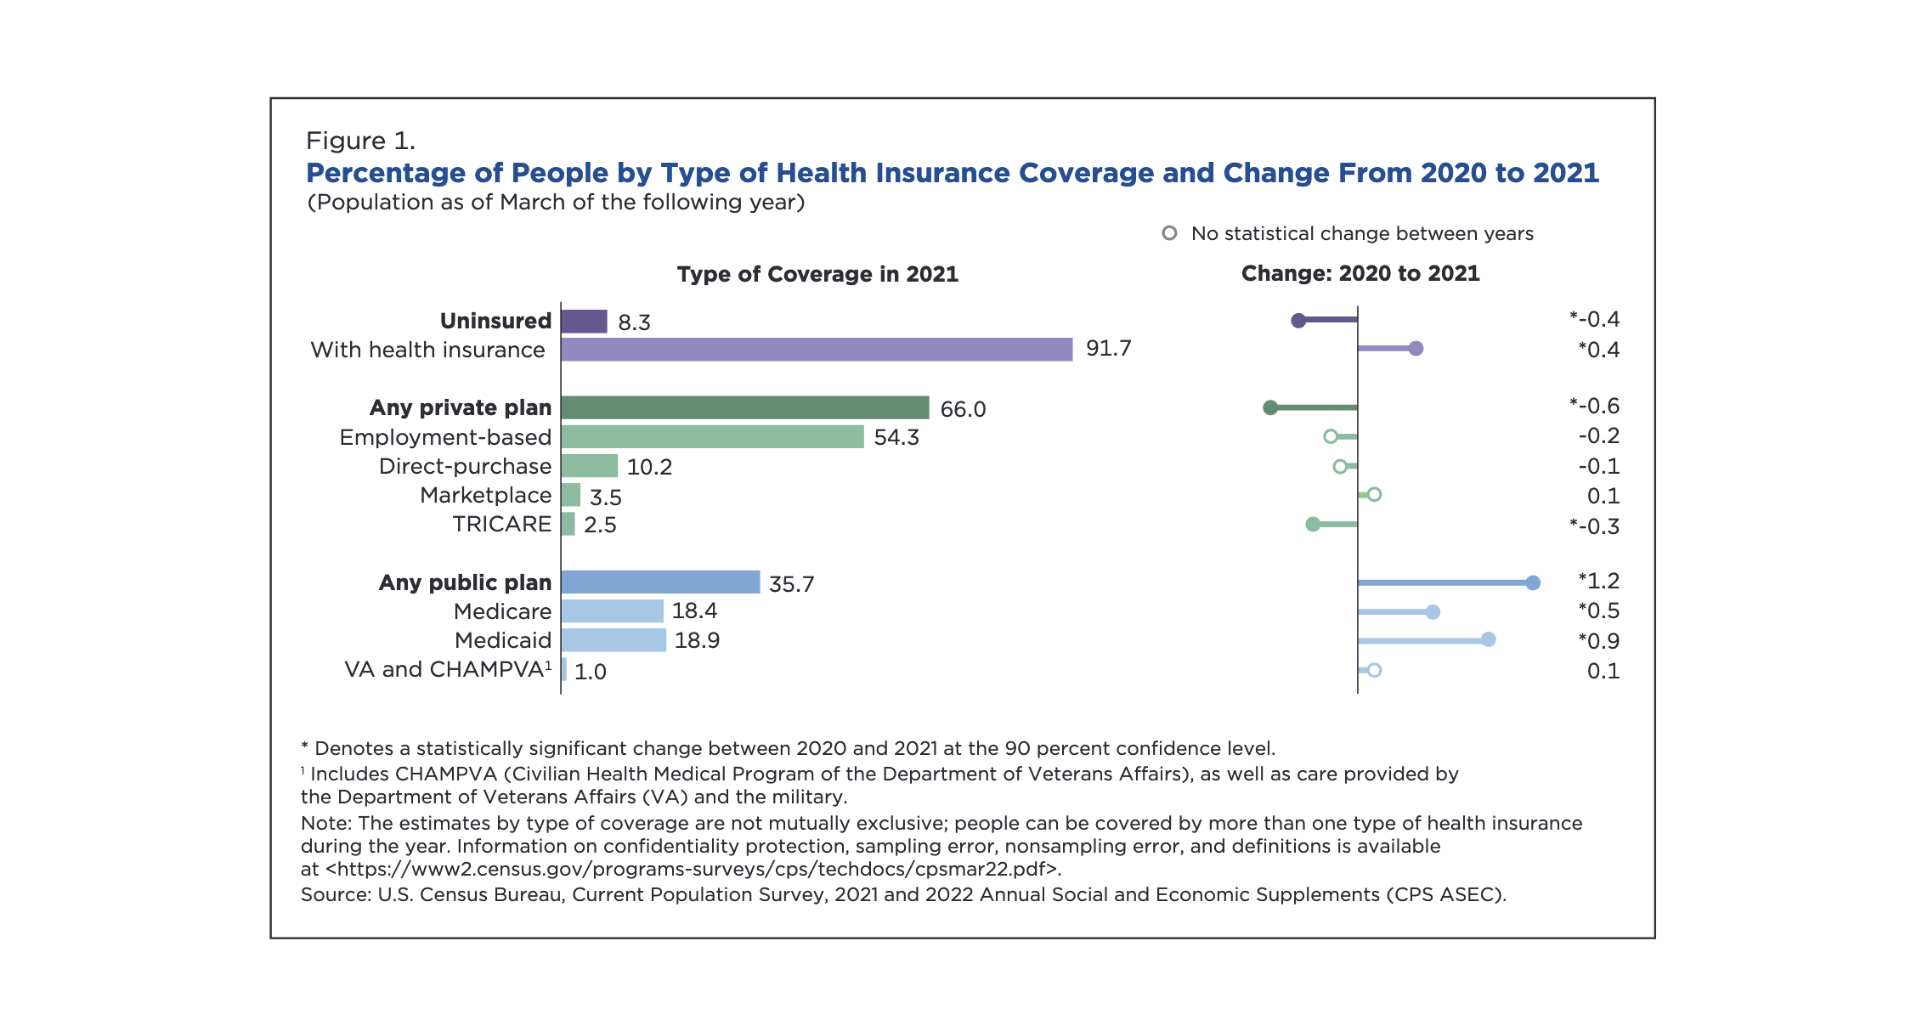 bar charts depicting percent of people by health insurance coverage type and change from 2020 to 2021